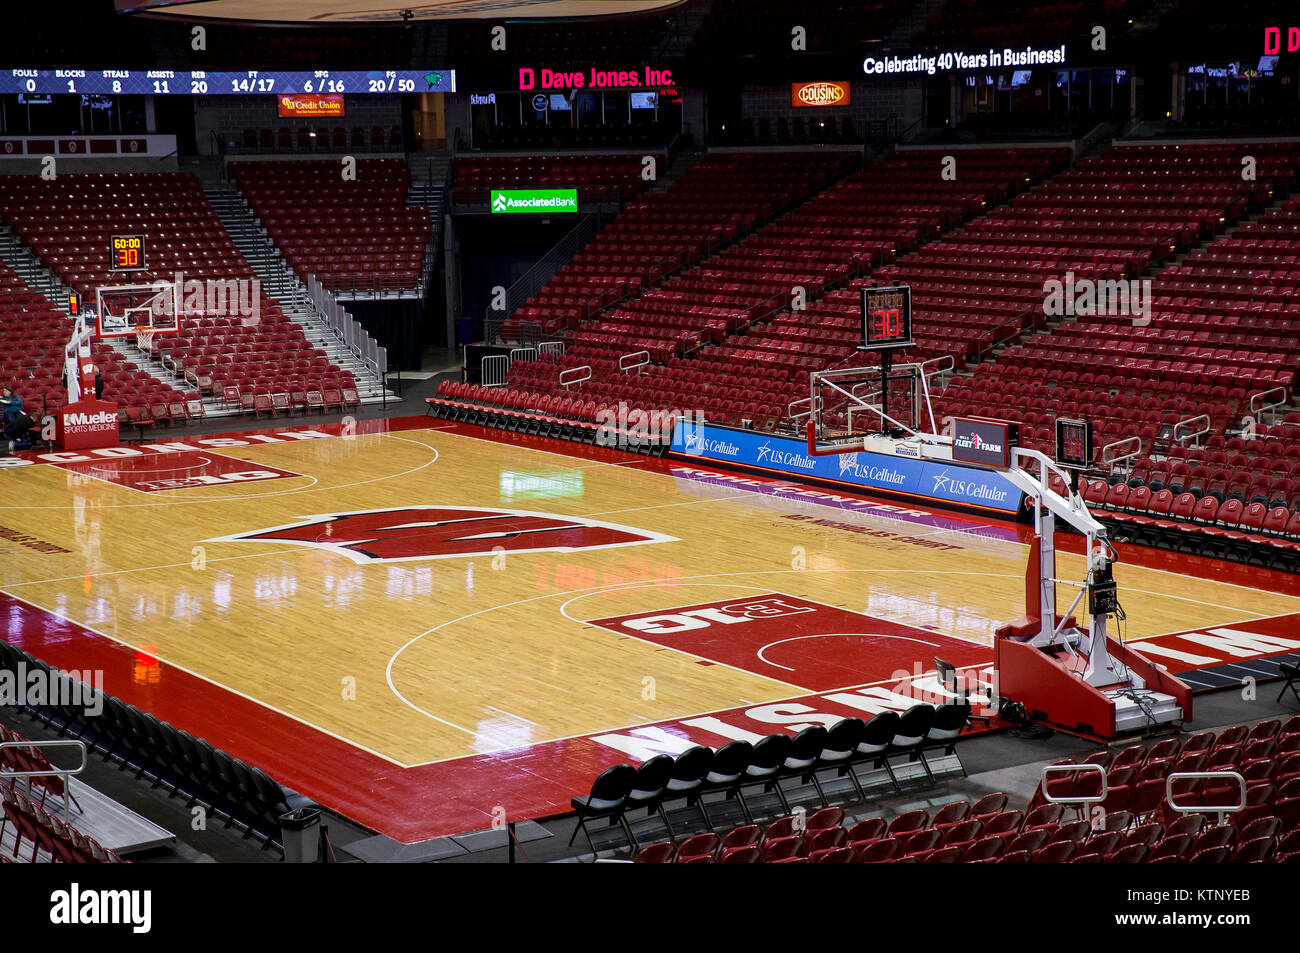 Madison, WI, USA. 27th Dec, 2017. A view of the court before the